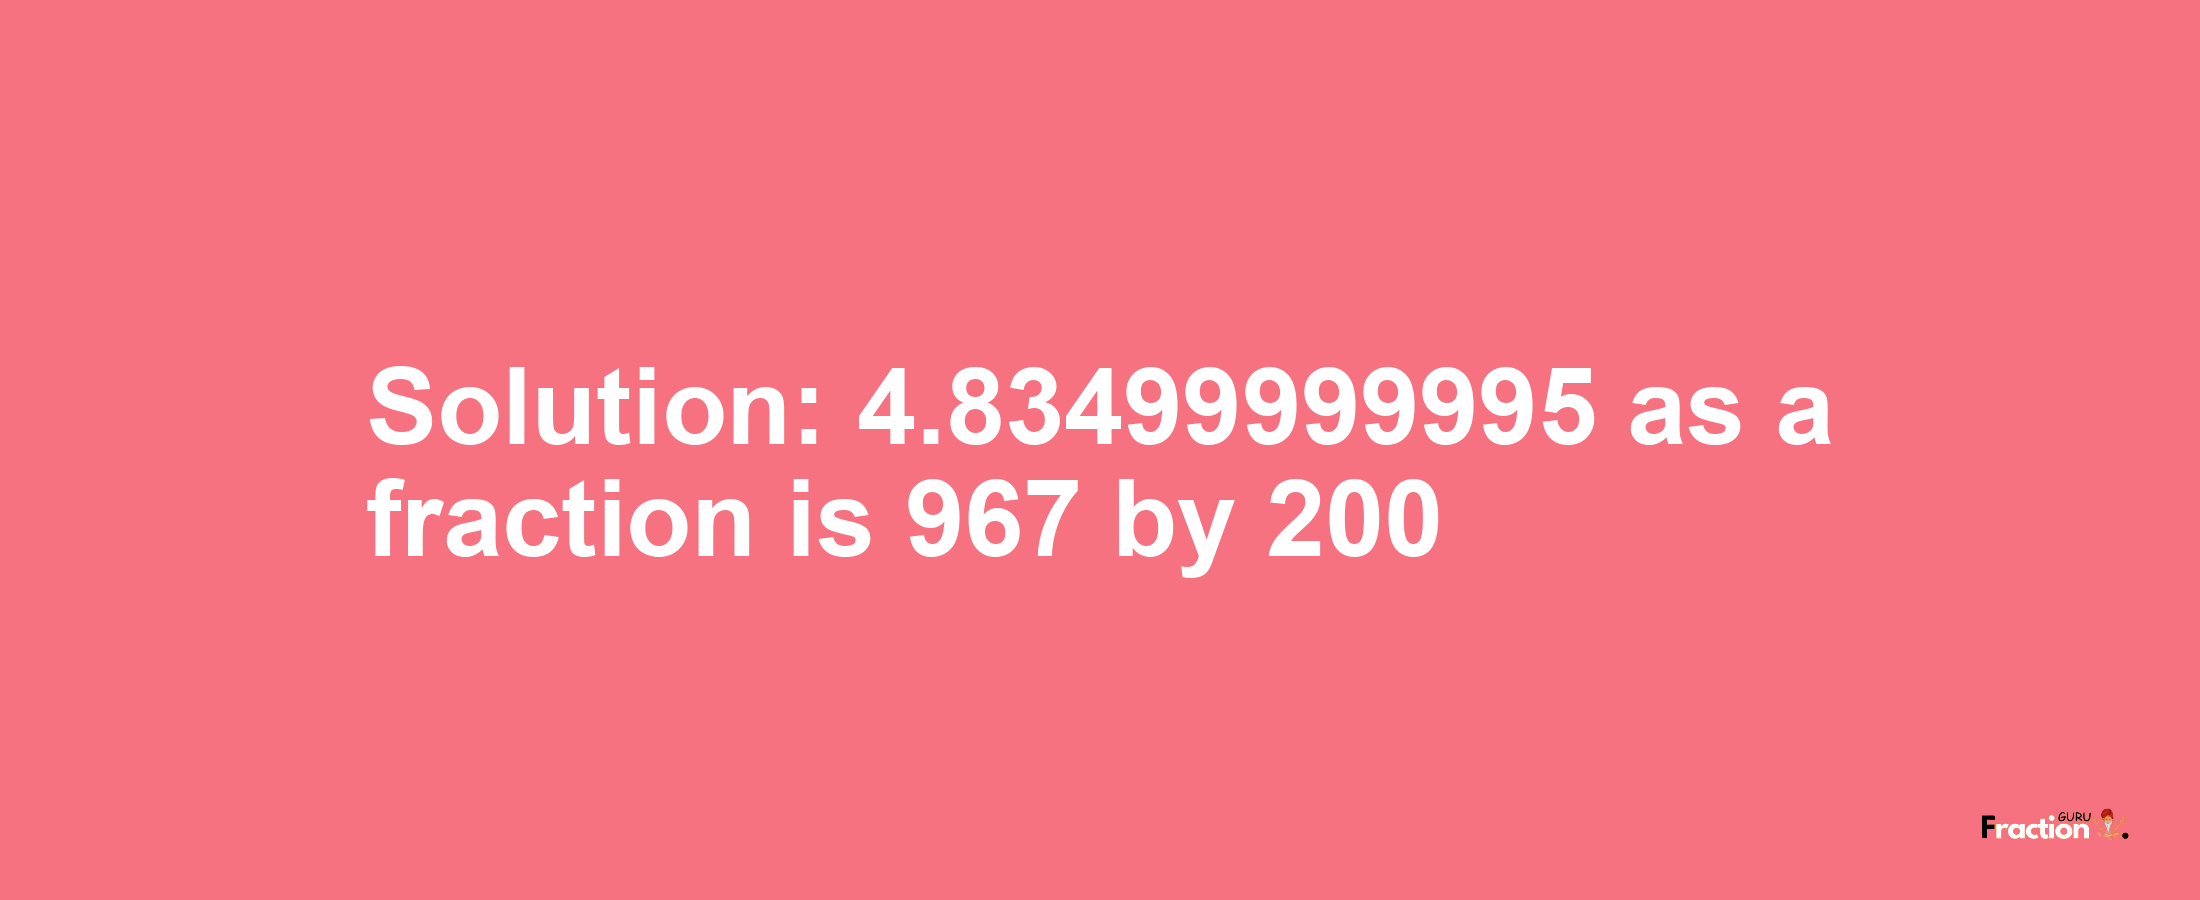 Solution:4.83499999995 as a fraction is 967/200